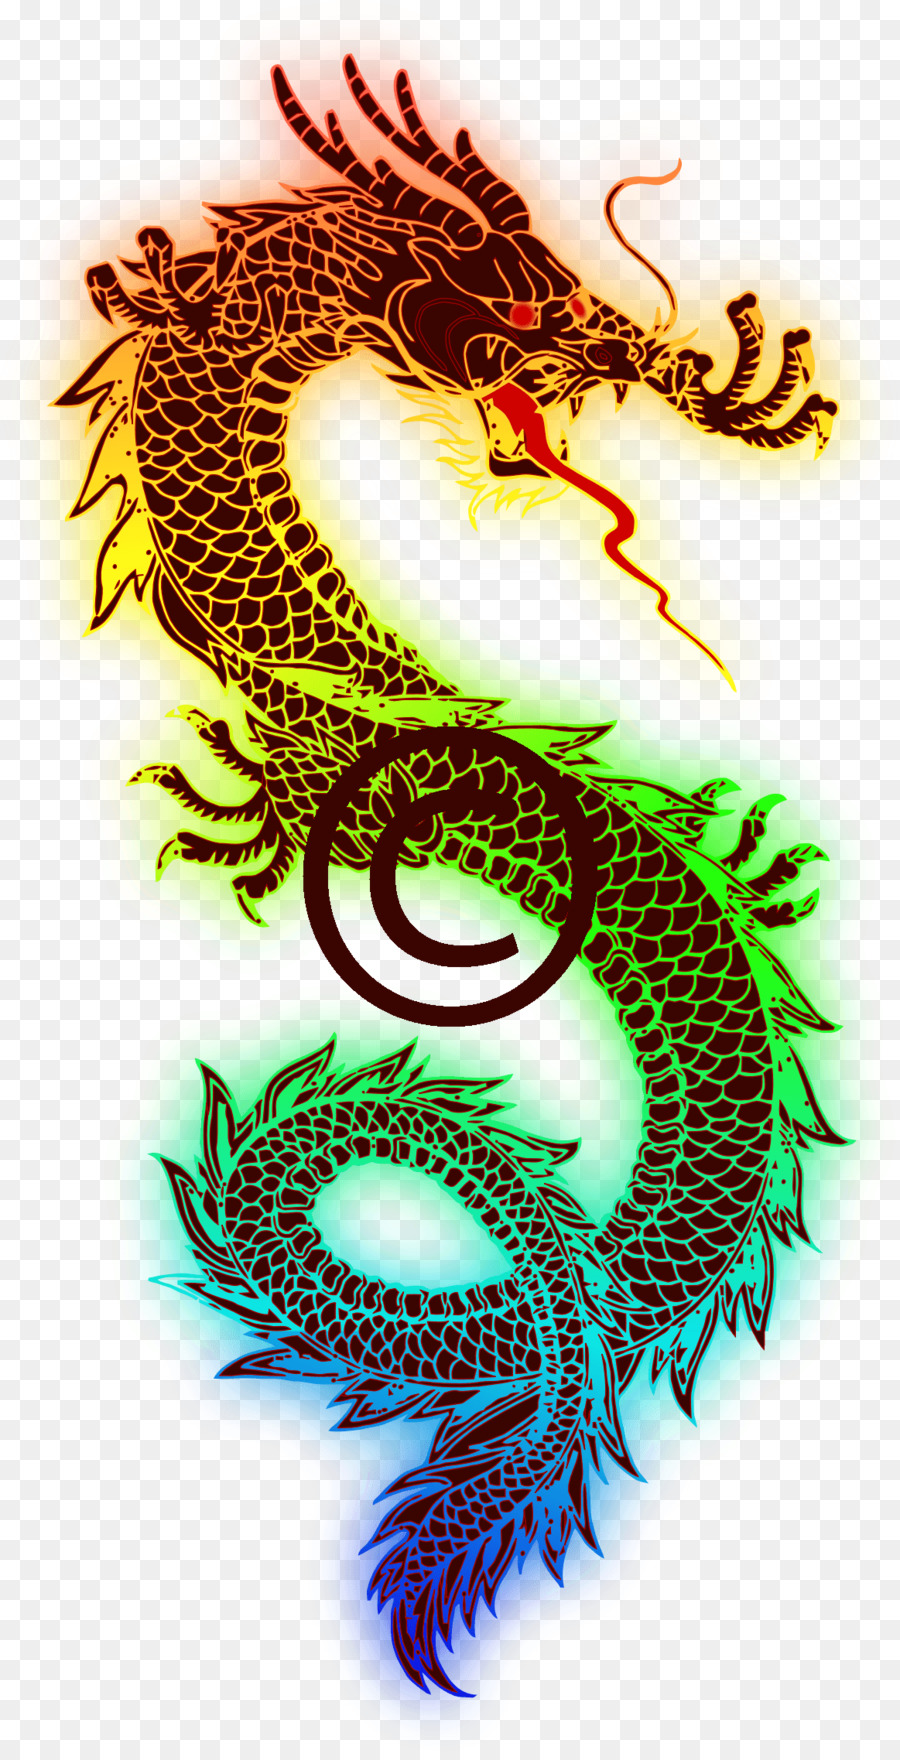 Chinese dragon Clip art - dragon png download - 1163*2271 - Free Transparent Chinese Dragon png Download.